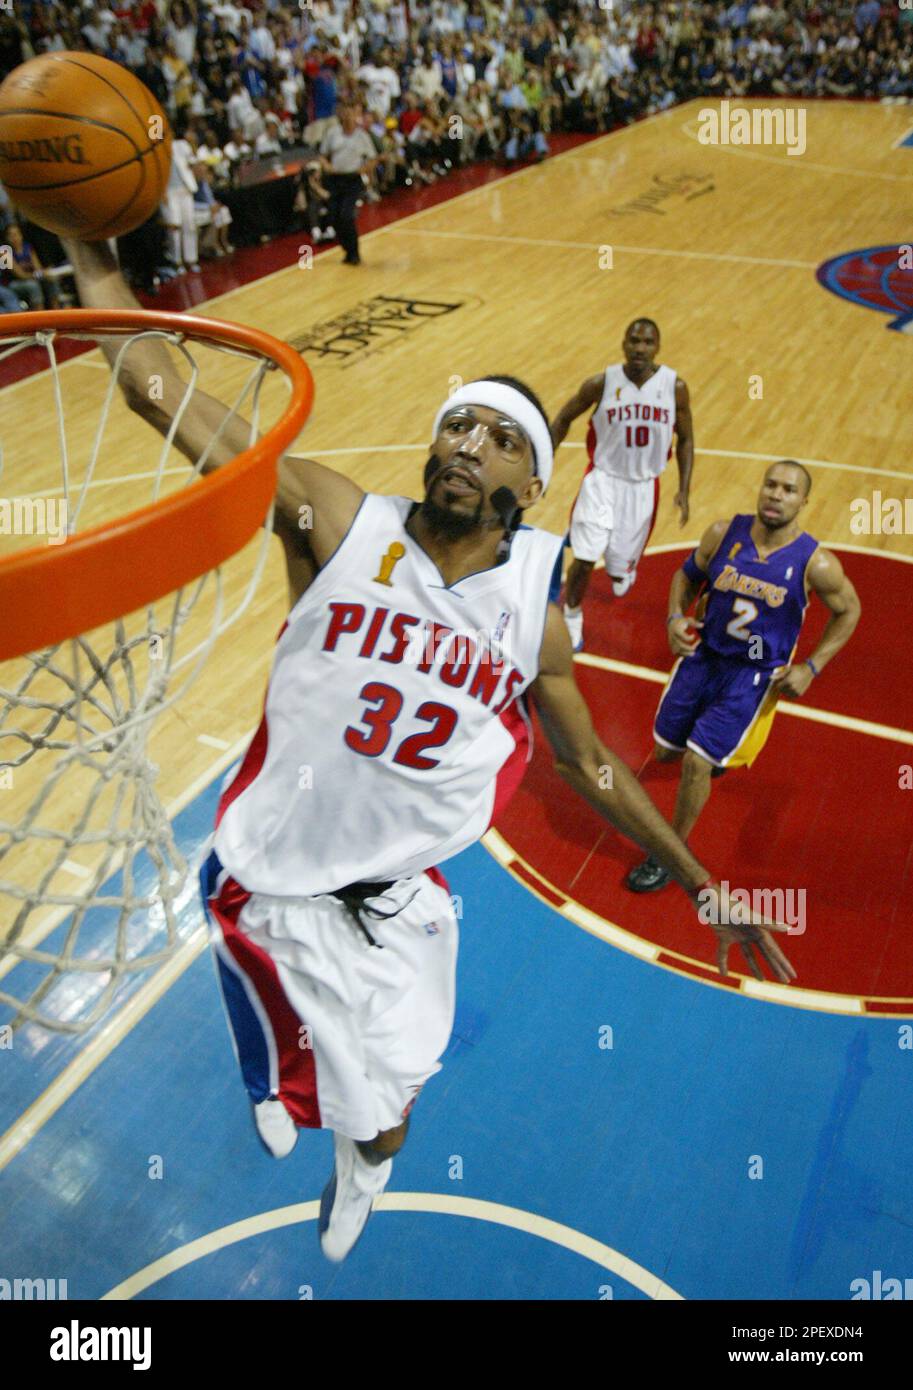 On this date: Derek Fisher saves the day in Game 3 of 2010 NBA Finals